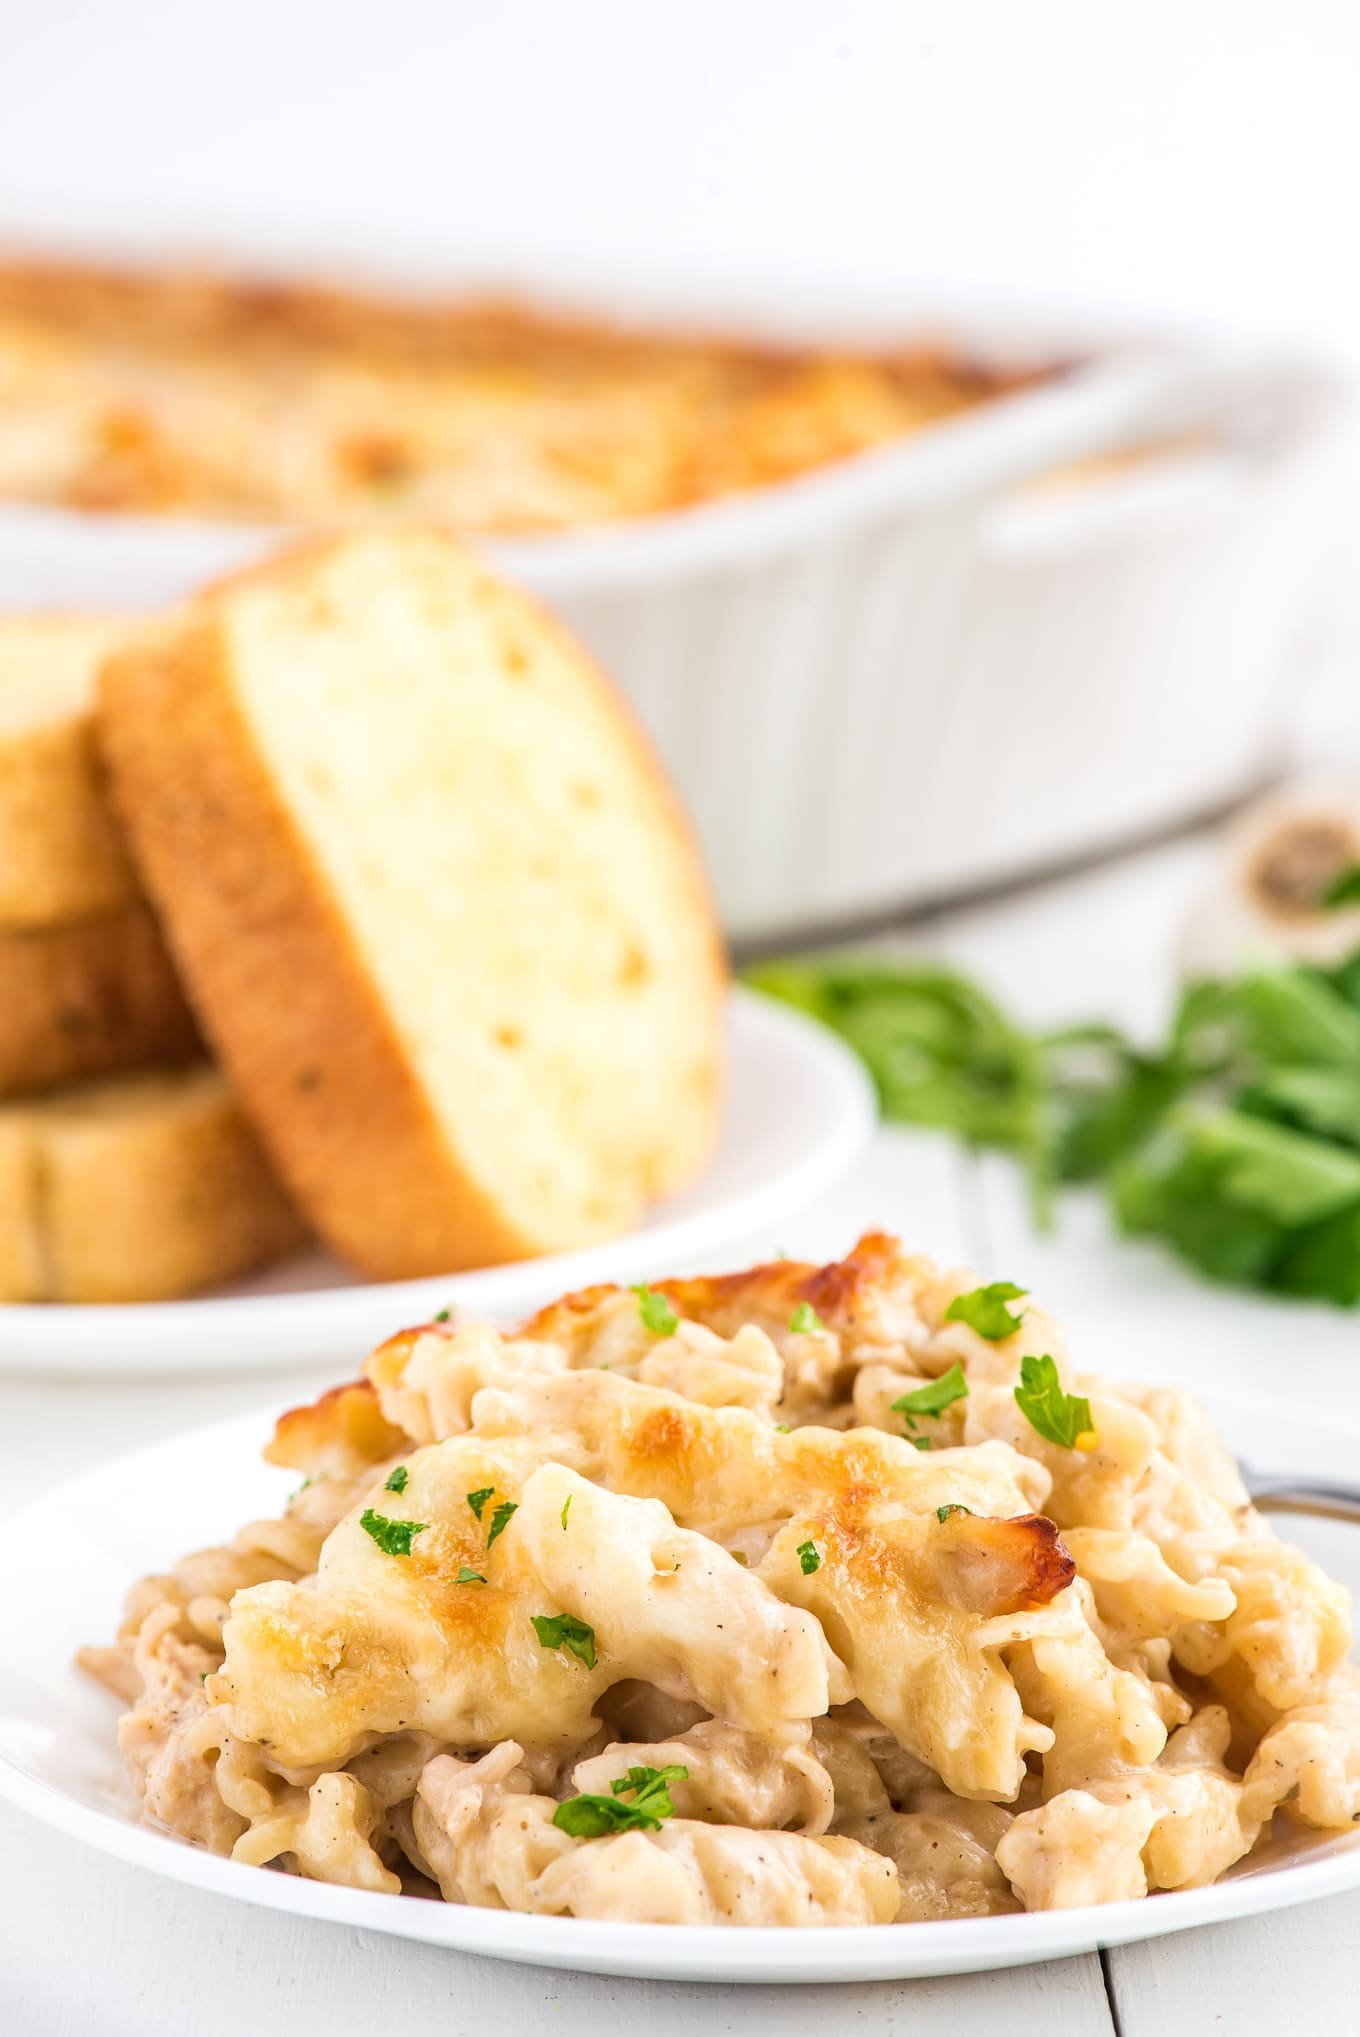 A plate of chicken alfredo bake pasta with parsley on top and a plate of garlic bread in the back.